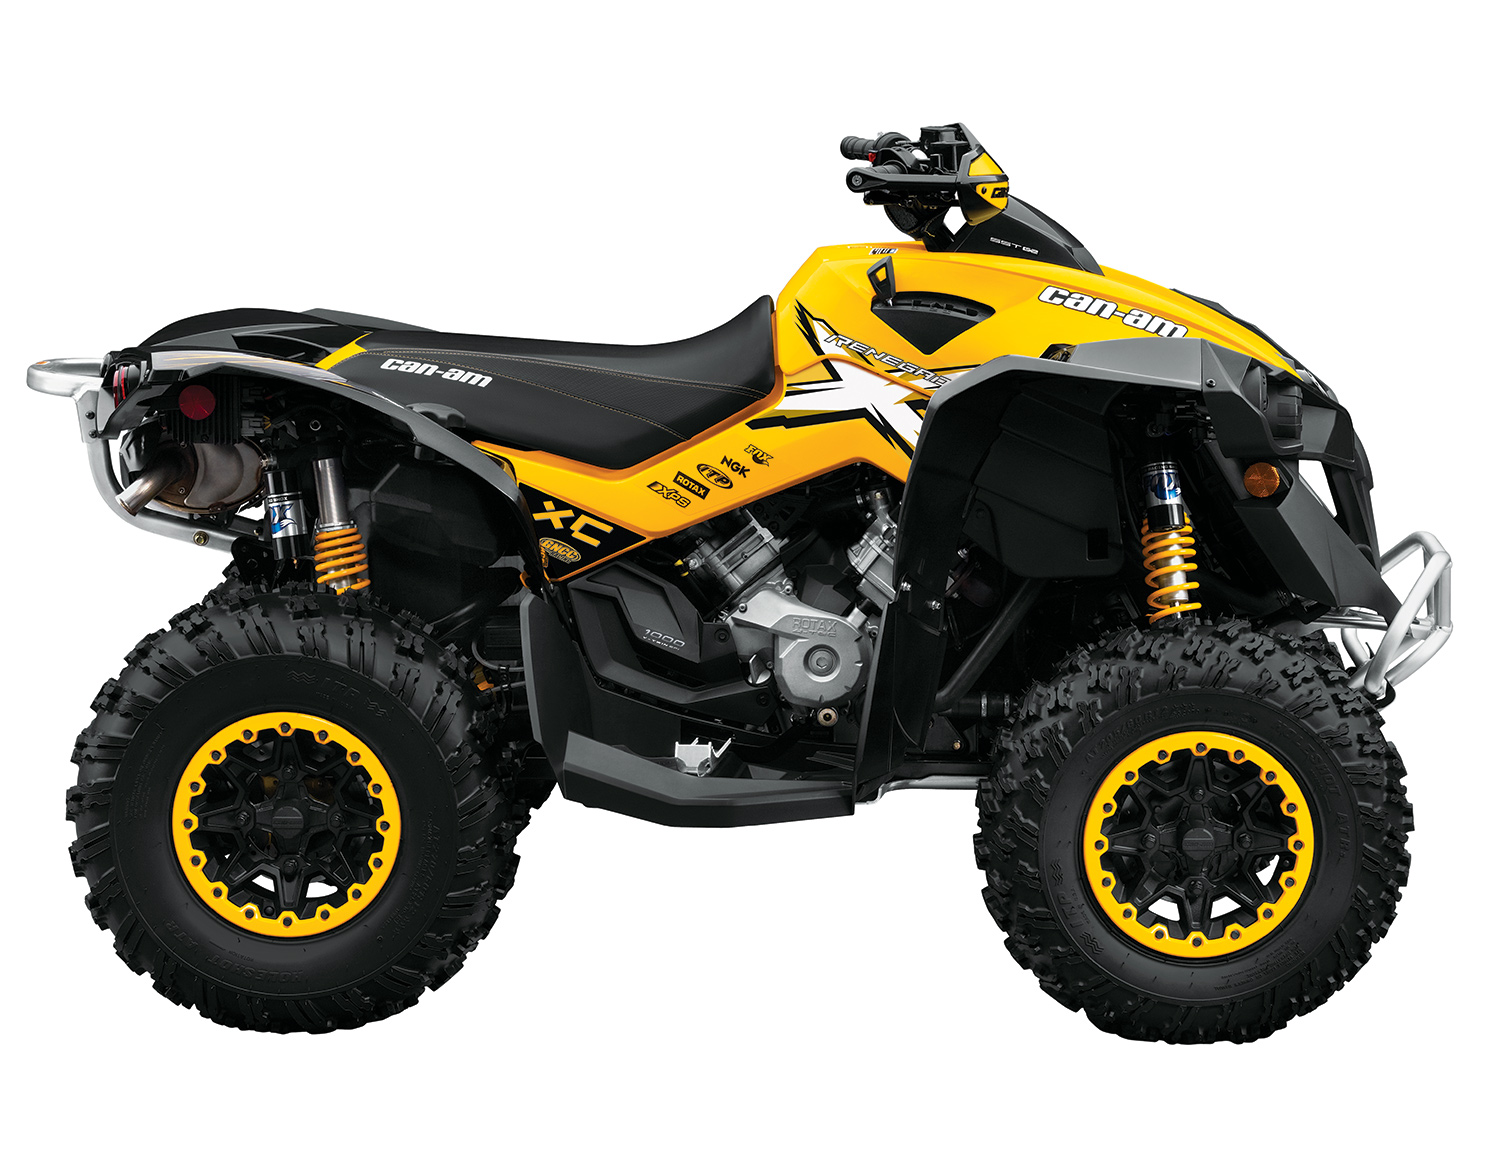  CAN-AM RENEGADE 1000 XXC v 2014  4 